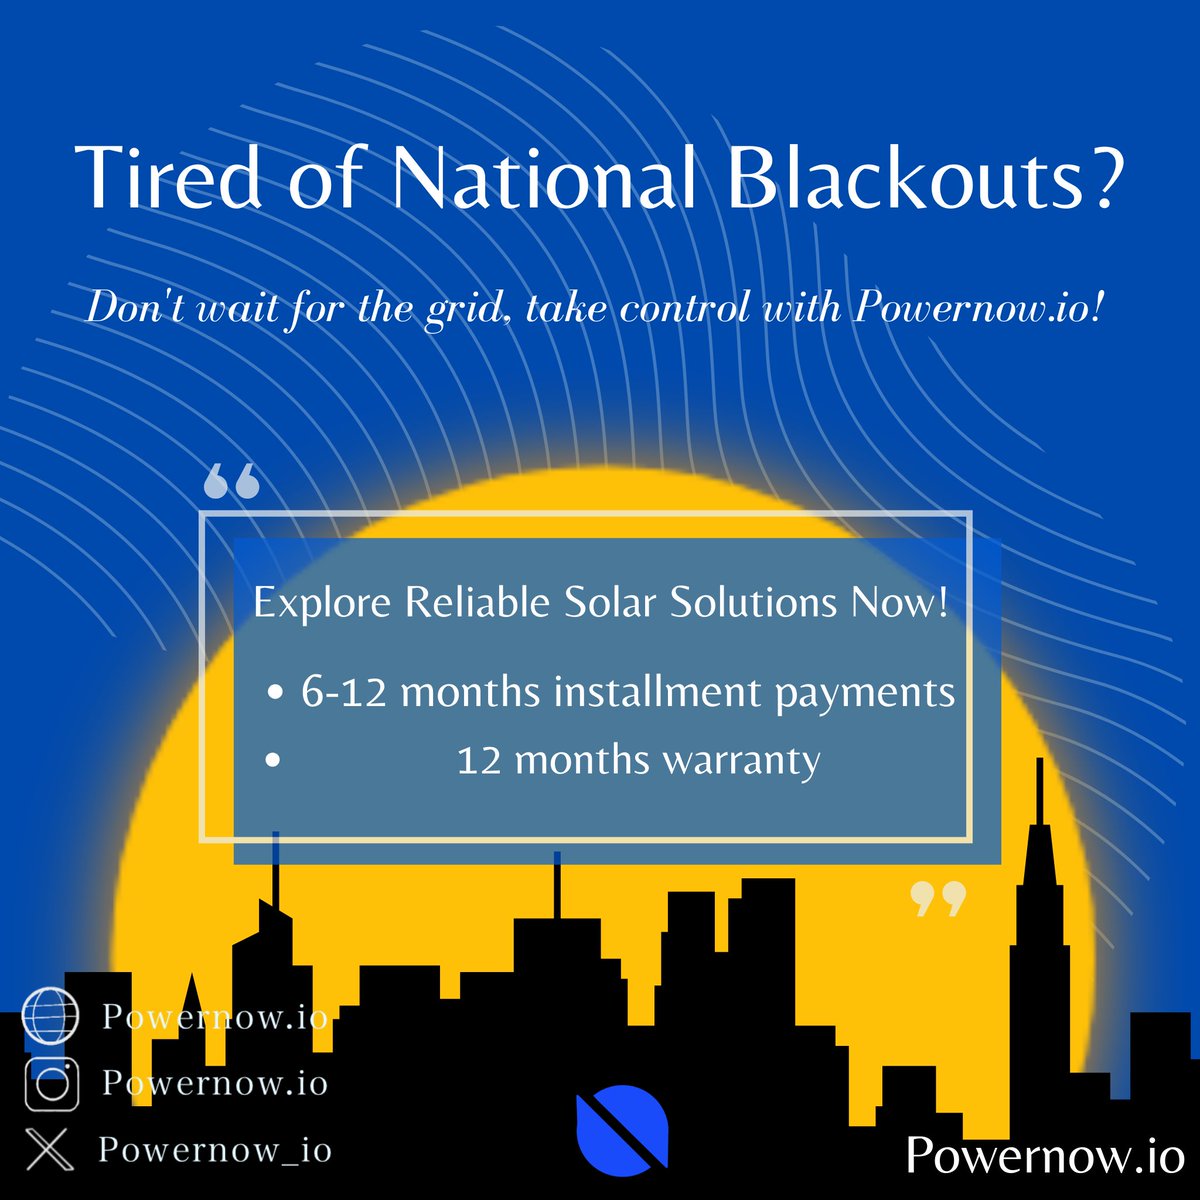 Say goodbye to national blackouts  and hello to 24/7 power with Powernow! 

Our solar panels and inverter batteries are your path to affordable, uninterrupted electricity. Make the smart switch today! 

#SolarPower #AffordableEnergy #PowernowSolutions